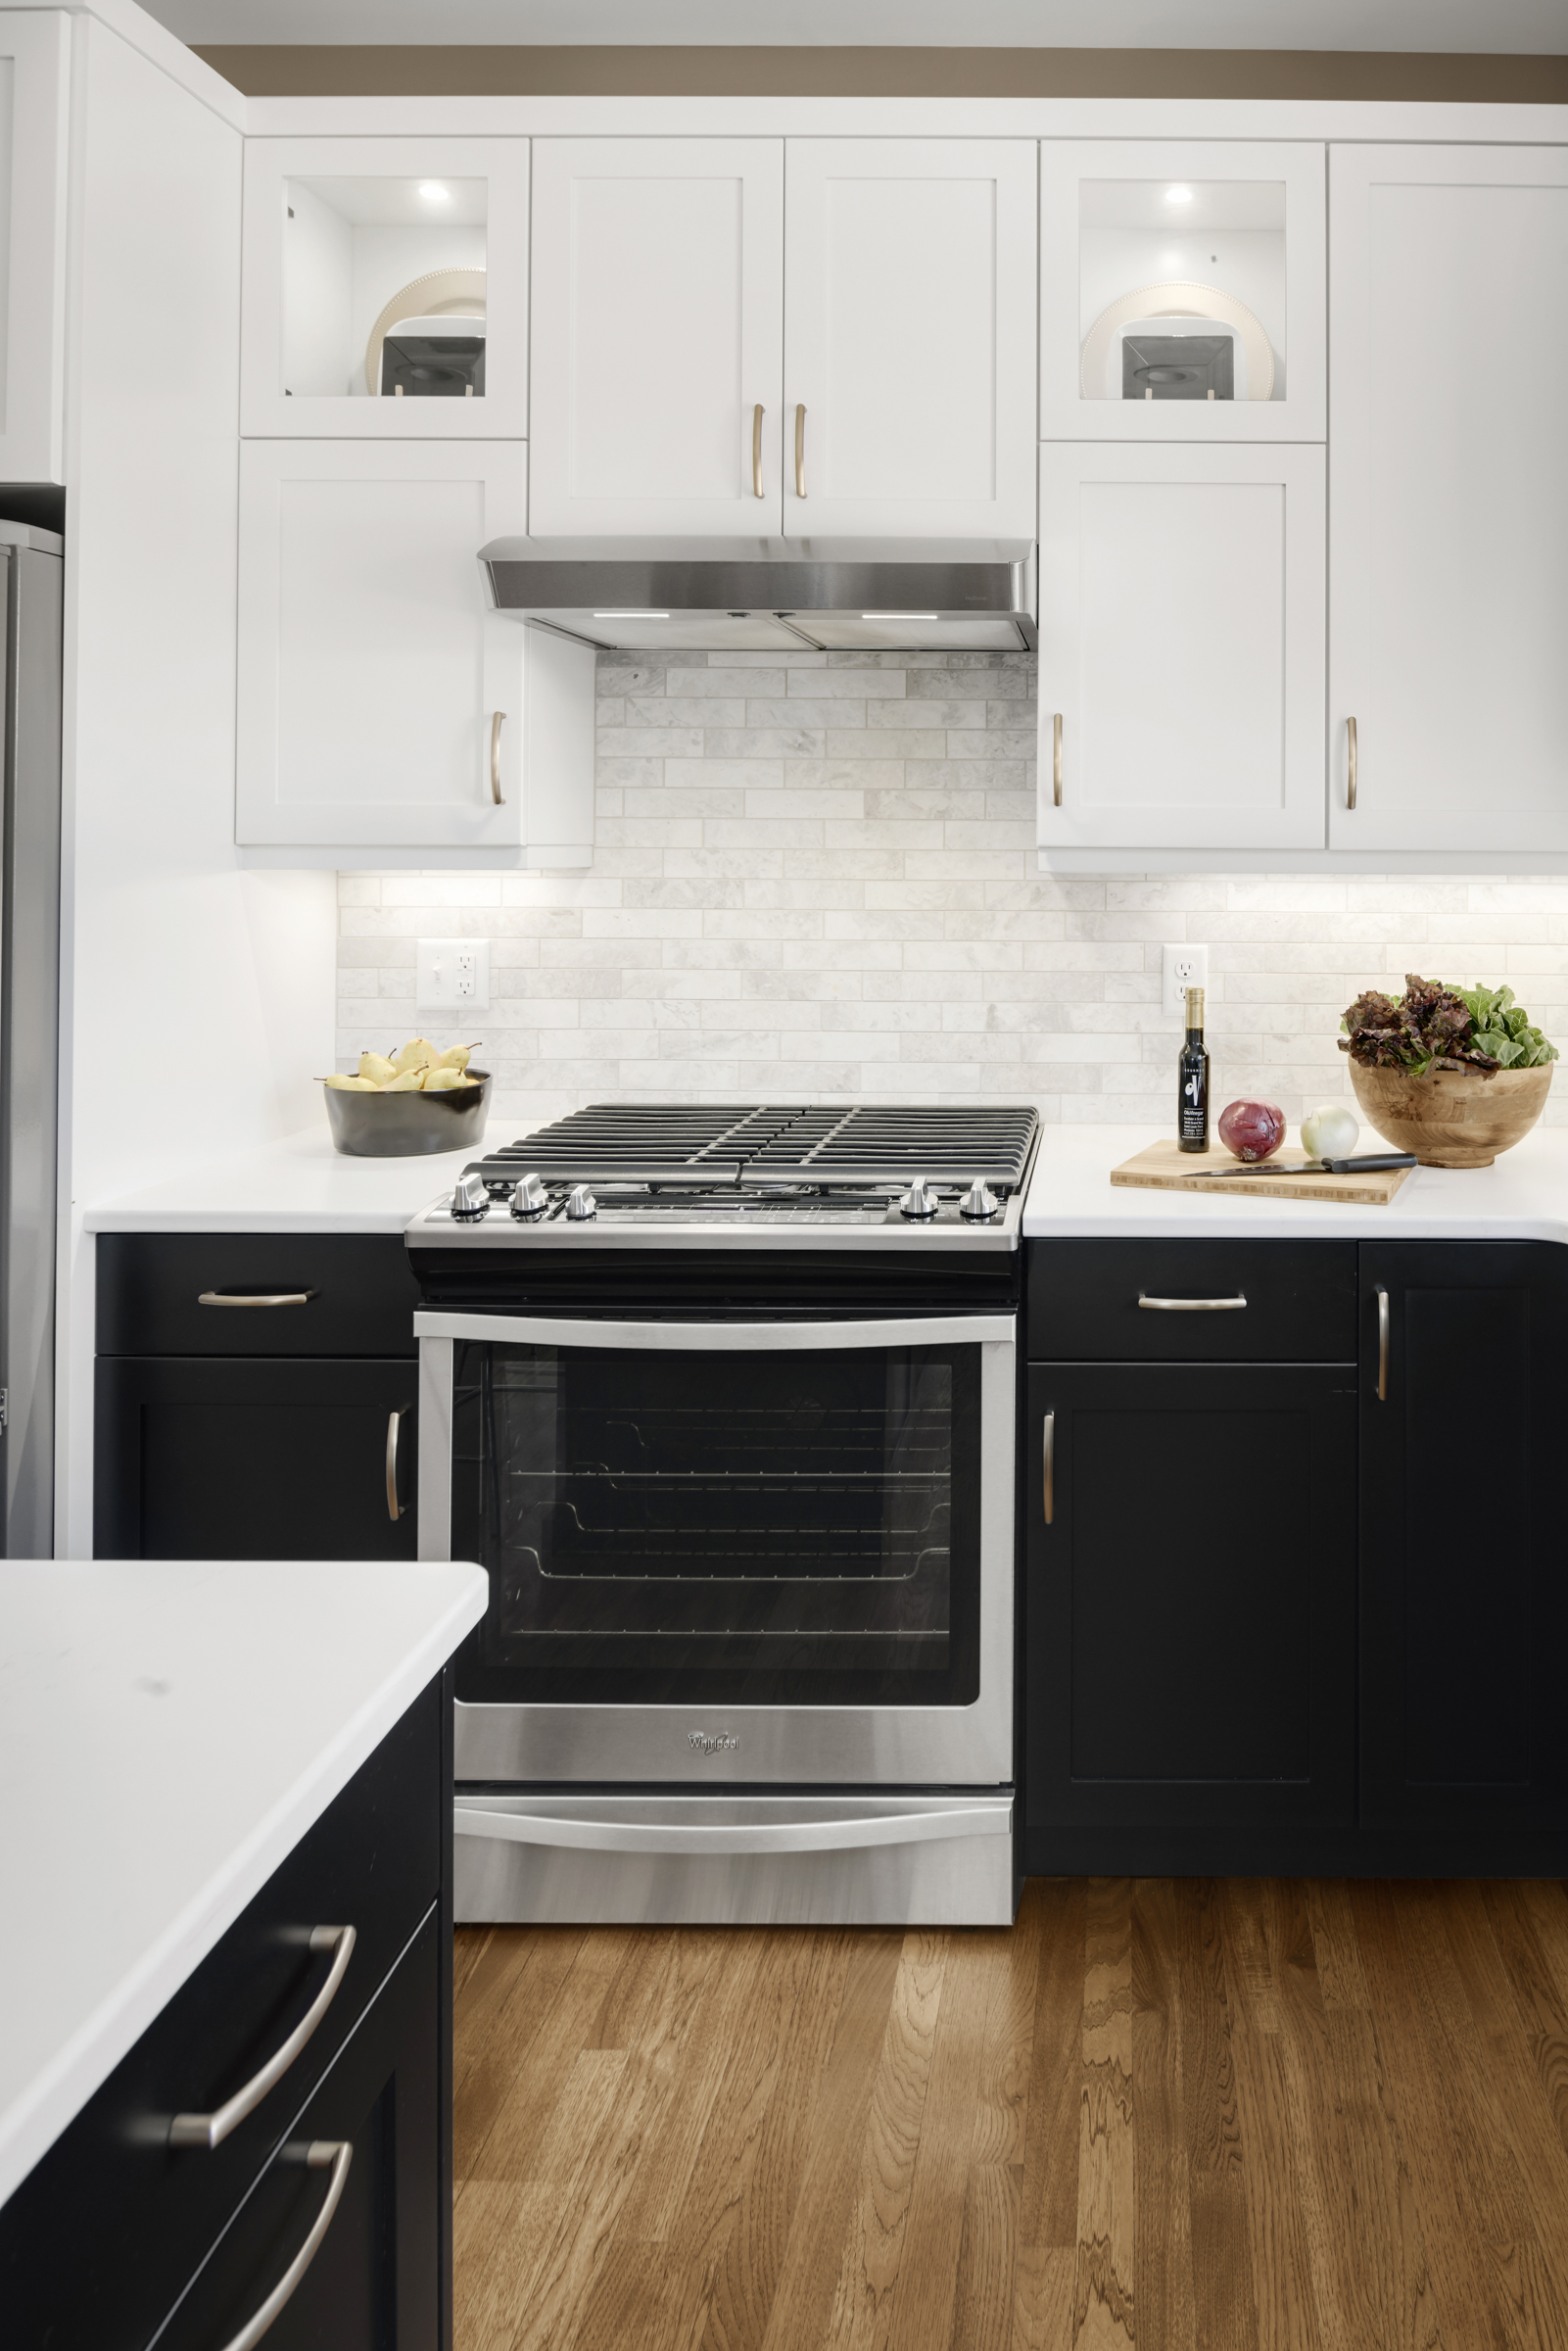 Bold kitchen renovation with black base cabinets, white upper cabinets, wood floor, and large island